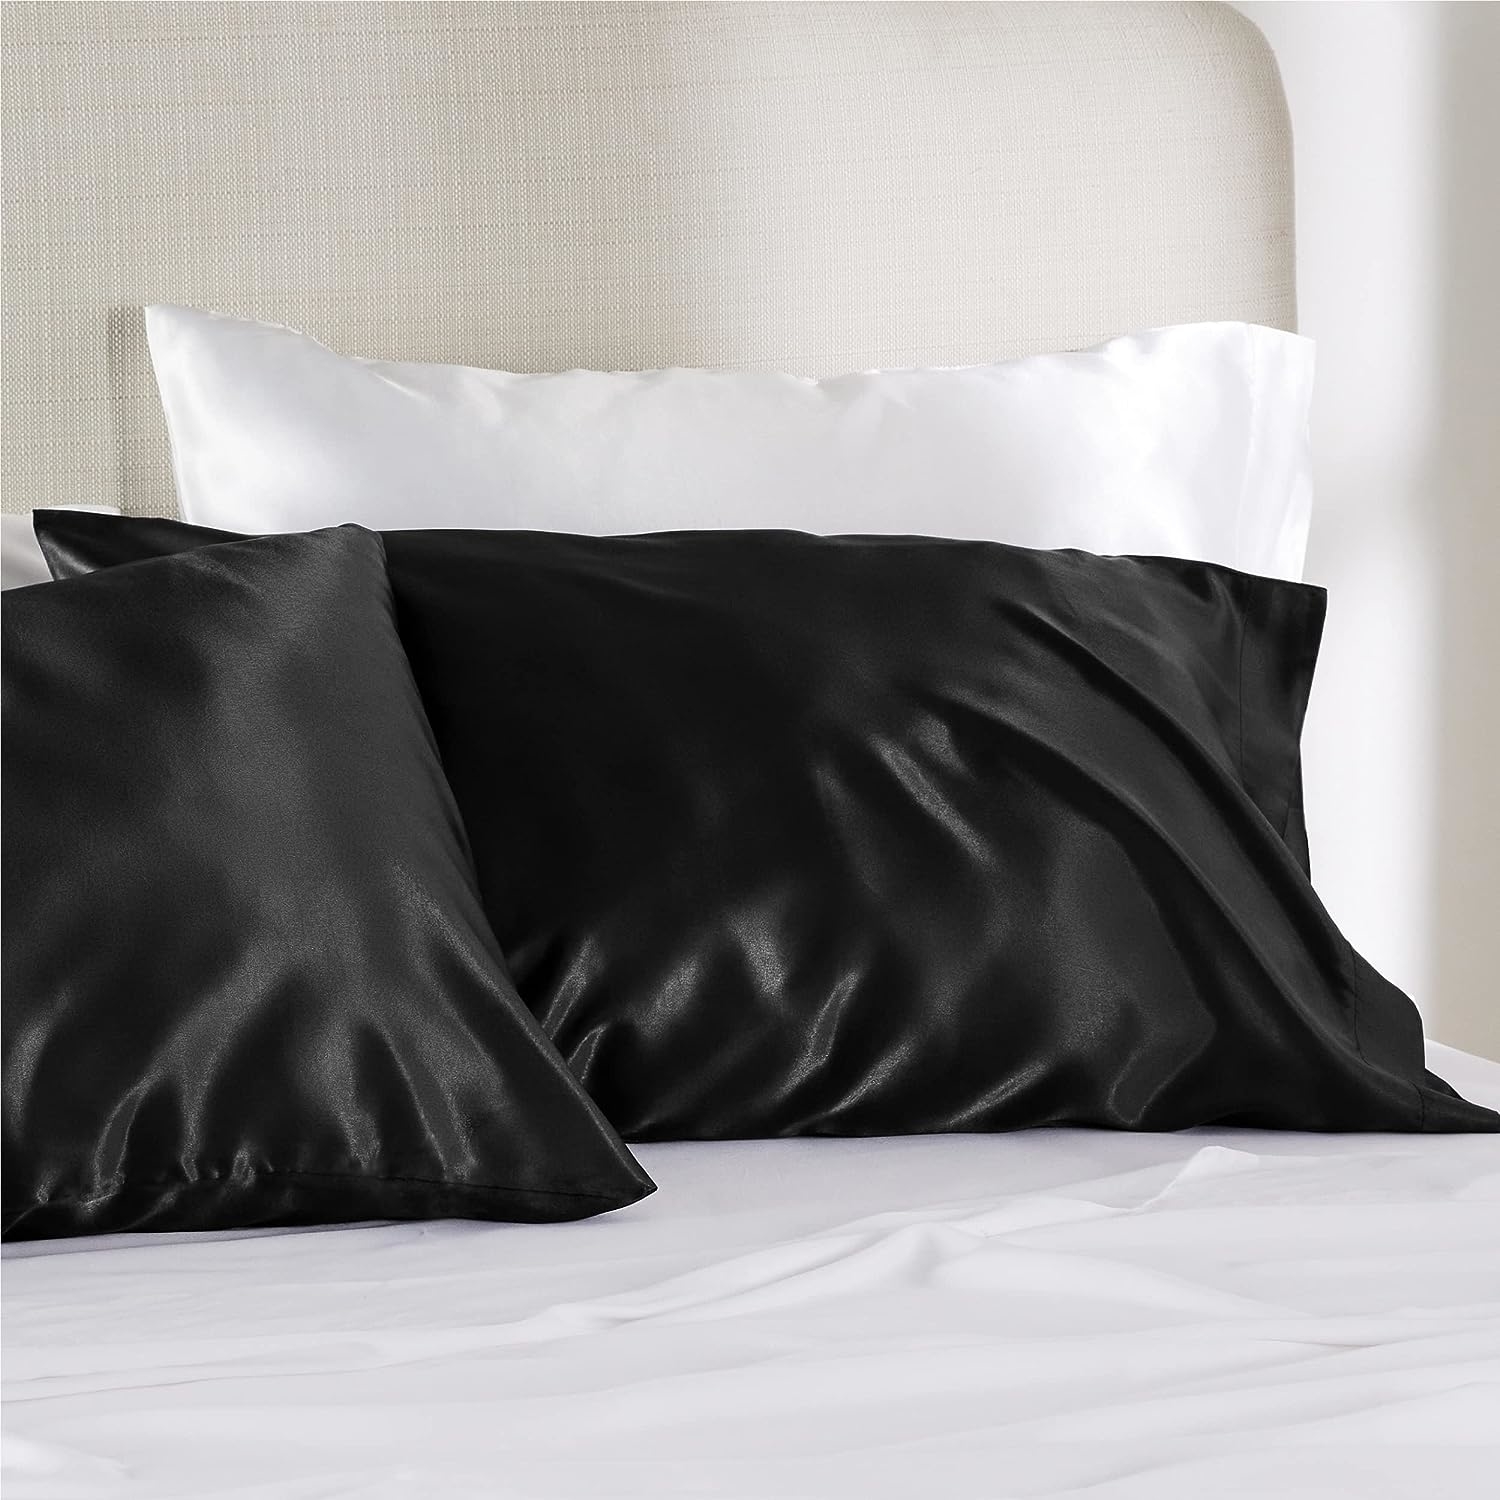 Two black satin pillowcases on a bed, signifying luxurious bedding options for shoppers